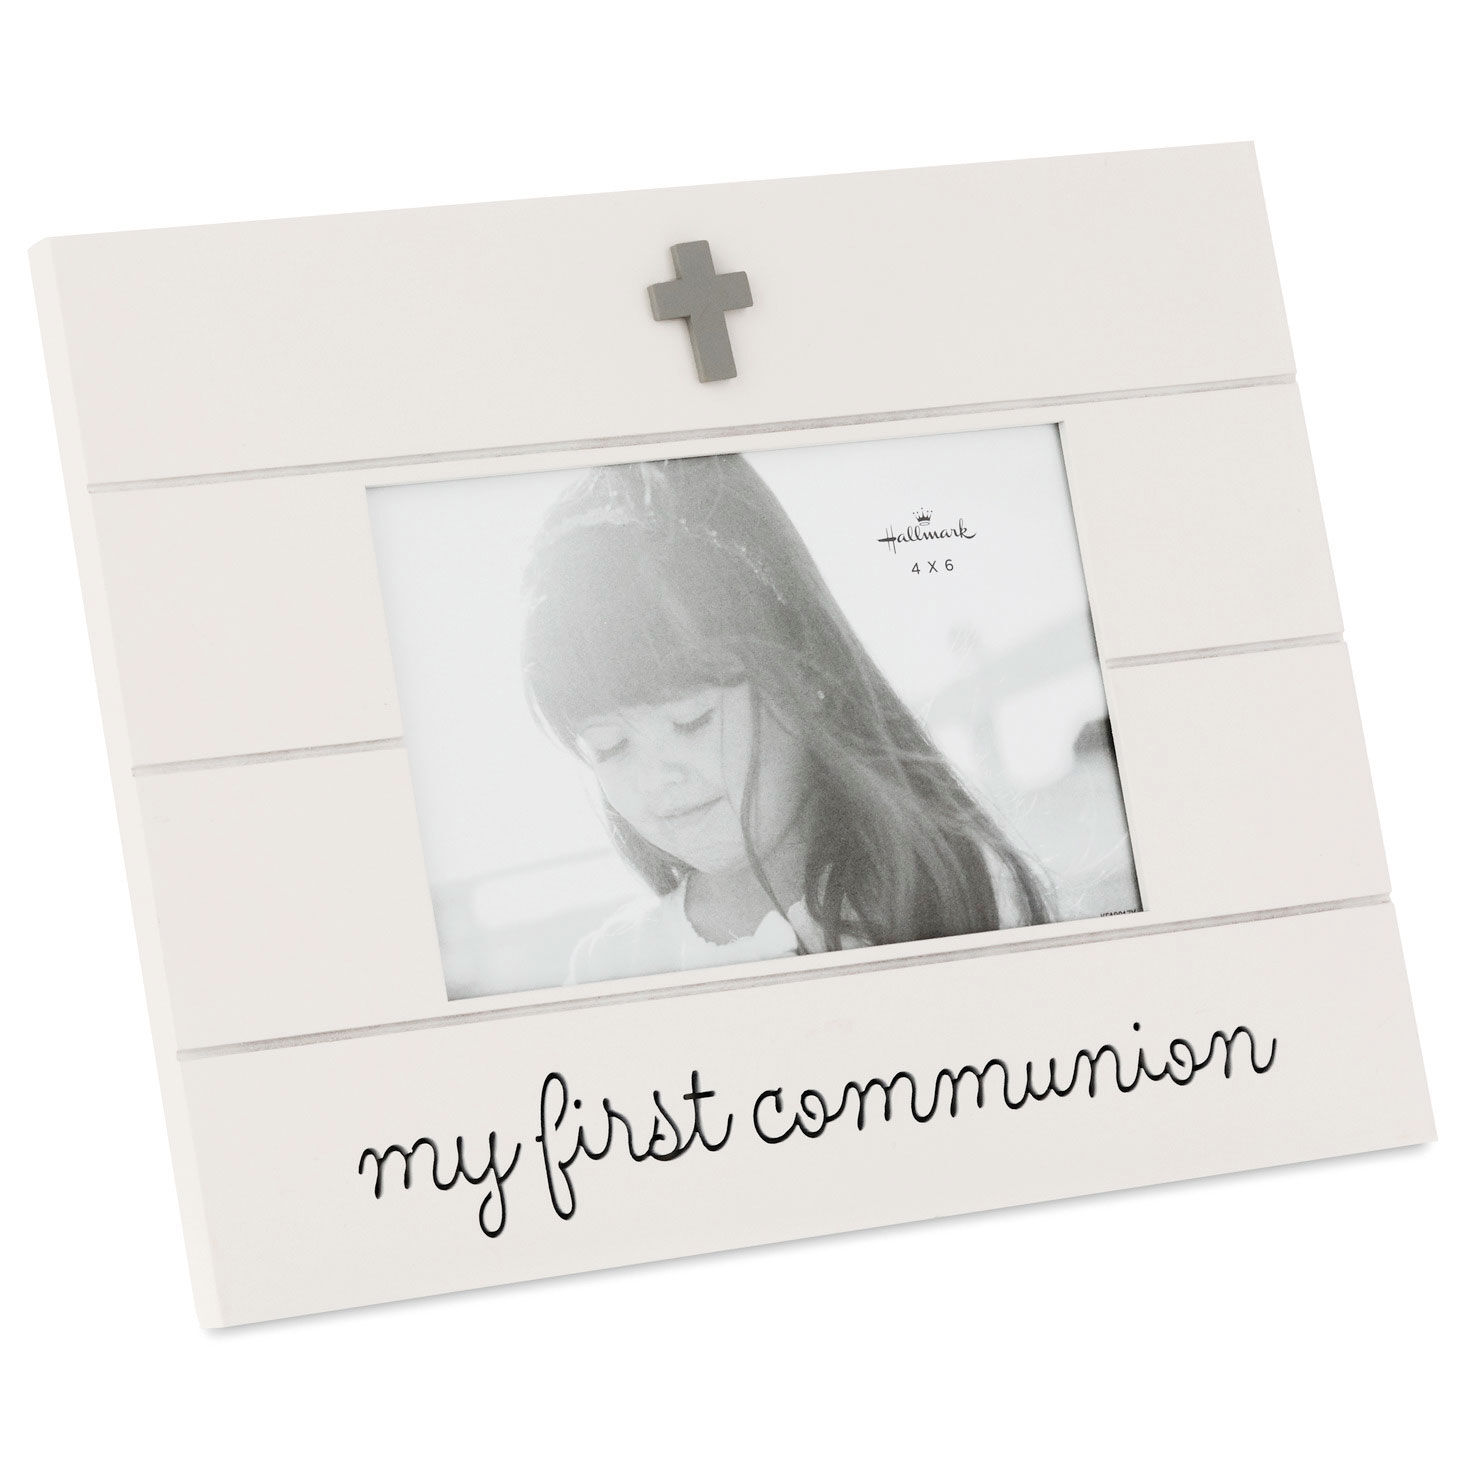 My first communion photo frame Gifts Table Decorations Presents 4 x 6 inches 